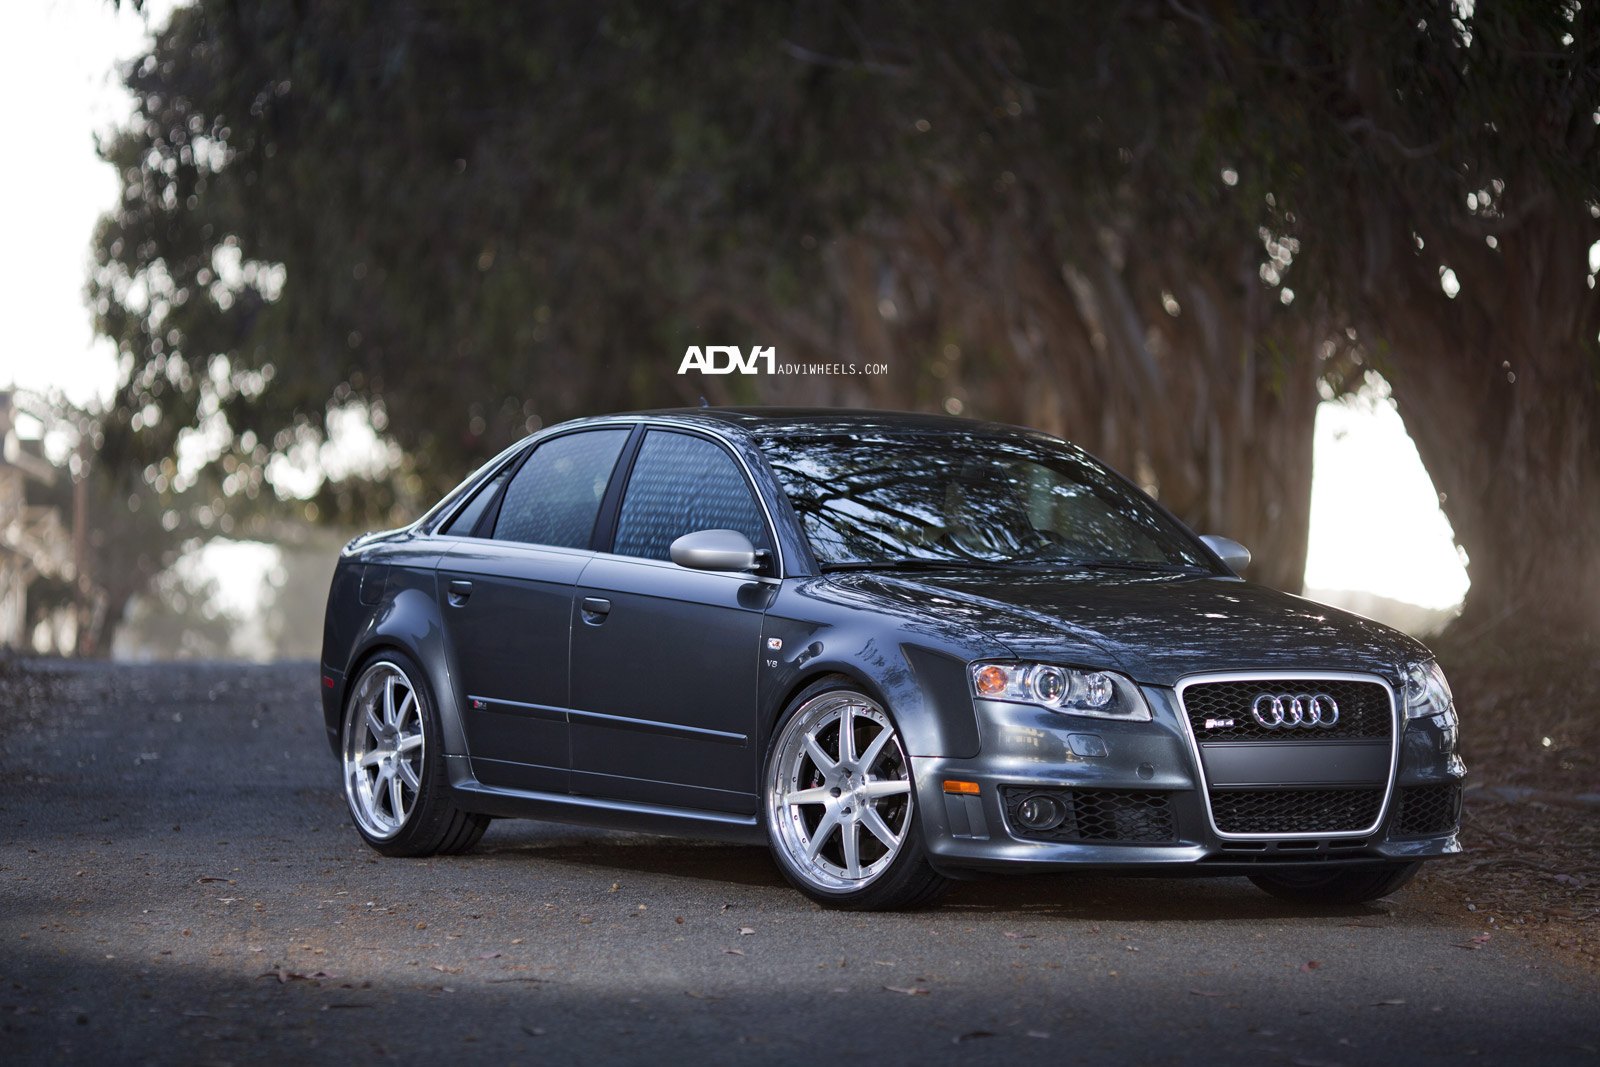 ADV08 Concave Wheels on Gray Audi RS4 - Photo by ADV.1